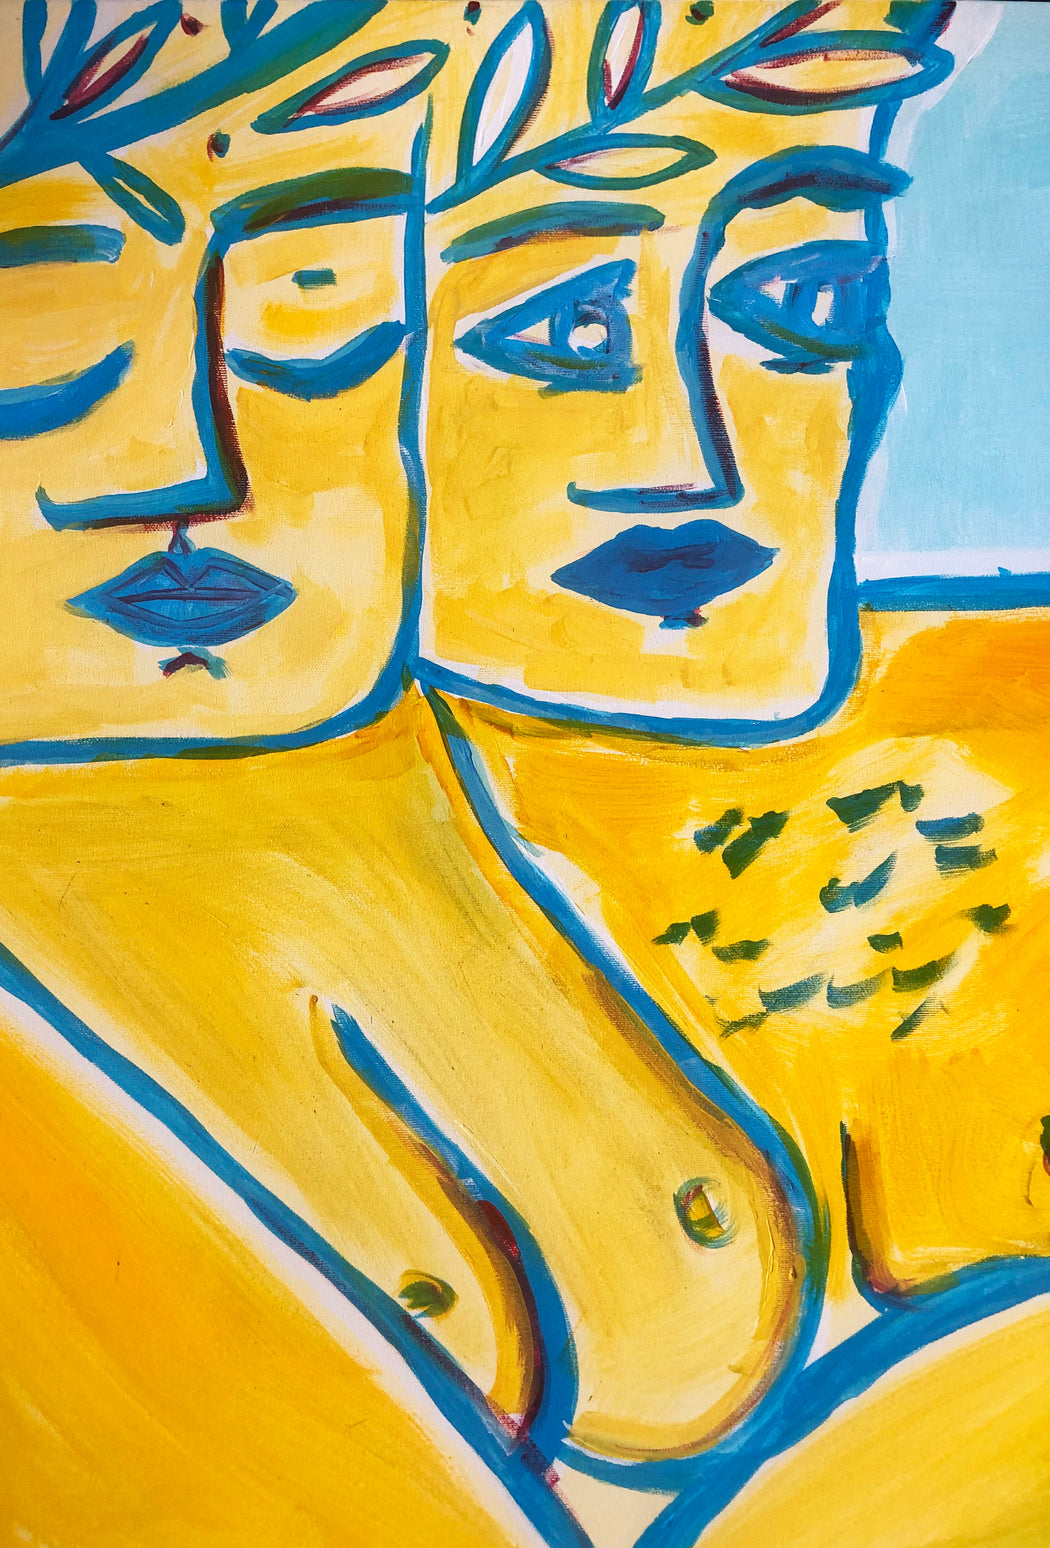 Together - Painting 210 x 80 cm